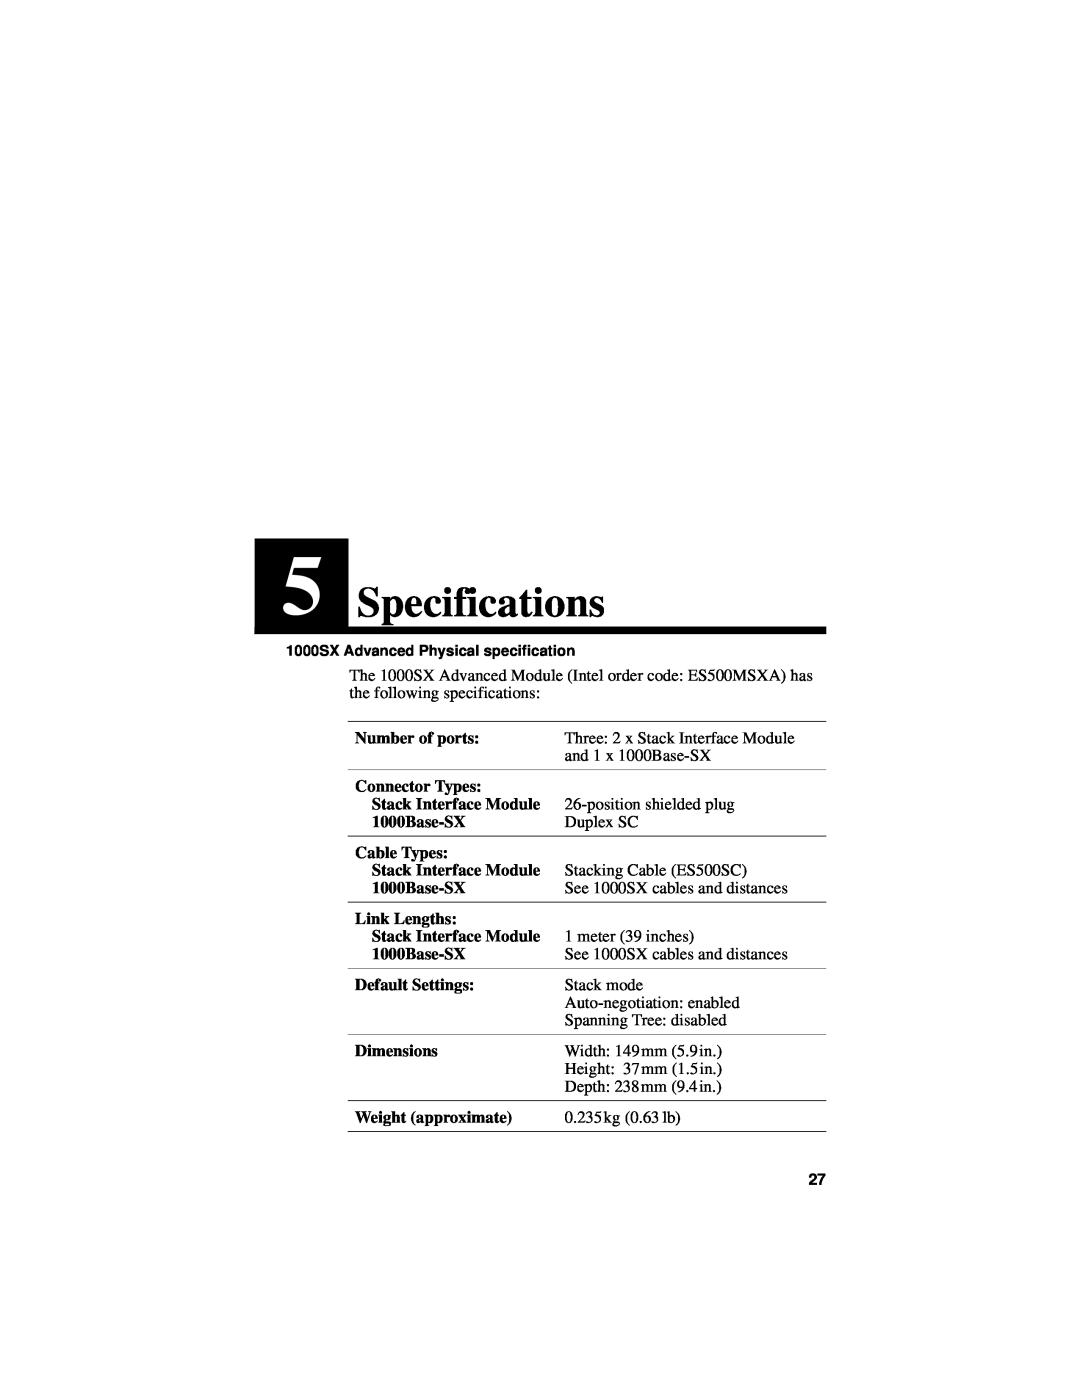 Intel manual Specifications, 1000SX Advanced Physical specification 